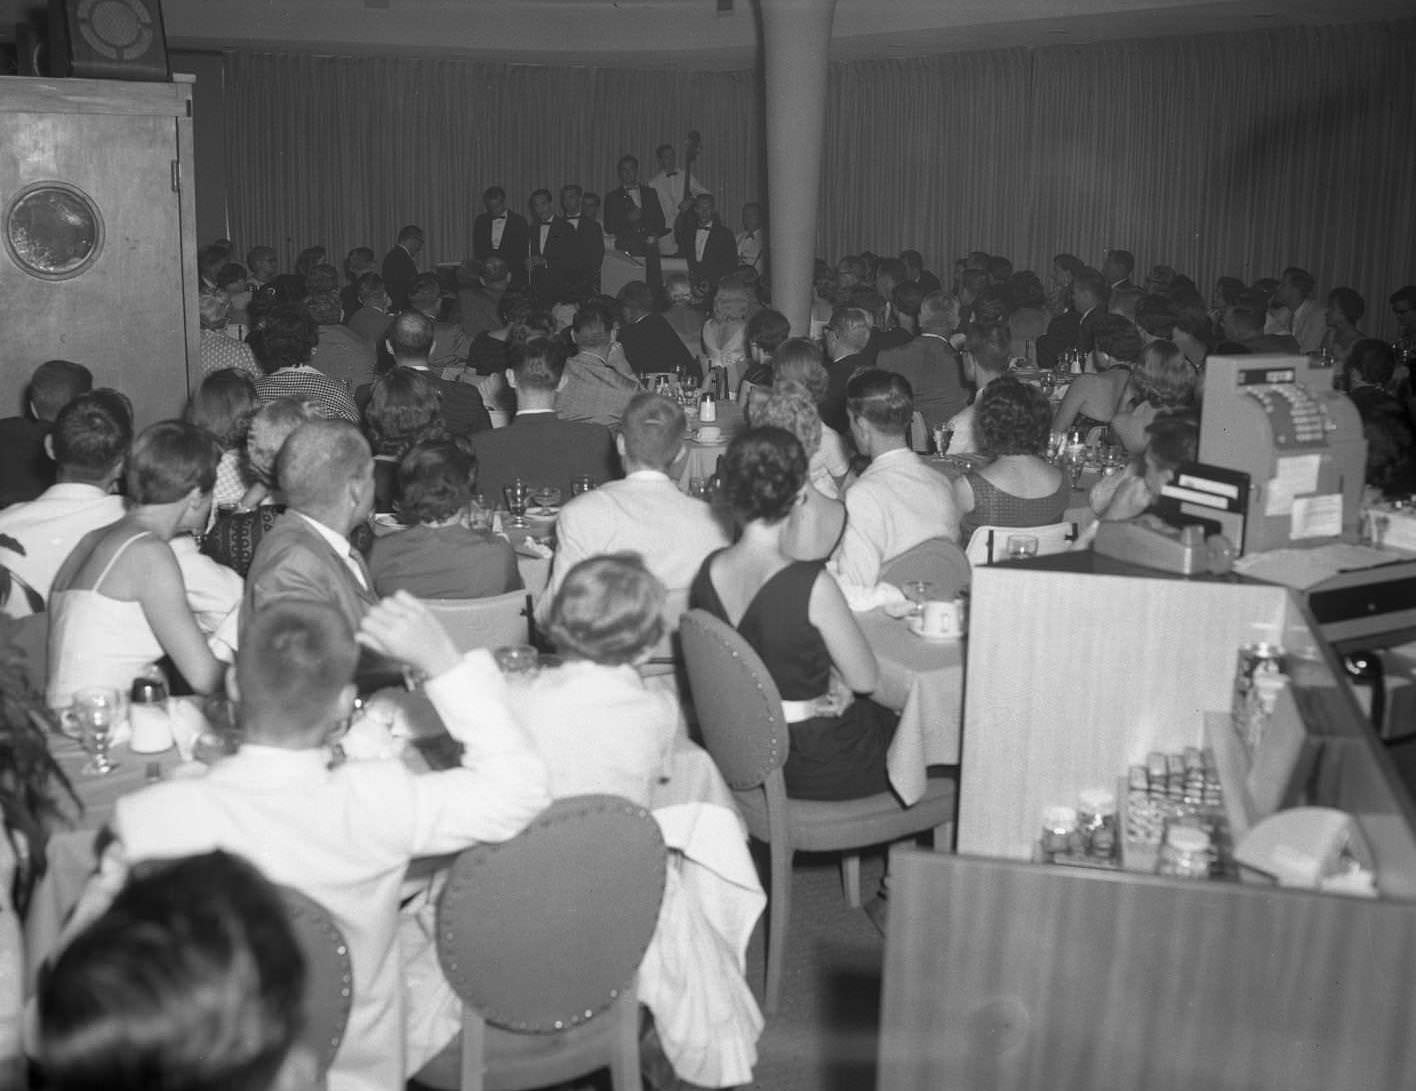 A show at the Sands Hotel in Abilene, 1957. The Crew Cuts quartet is singing on stage at the back of a room with an audience sitting around tables.